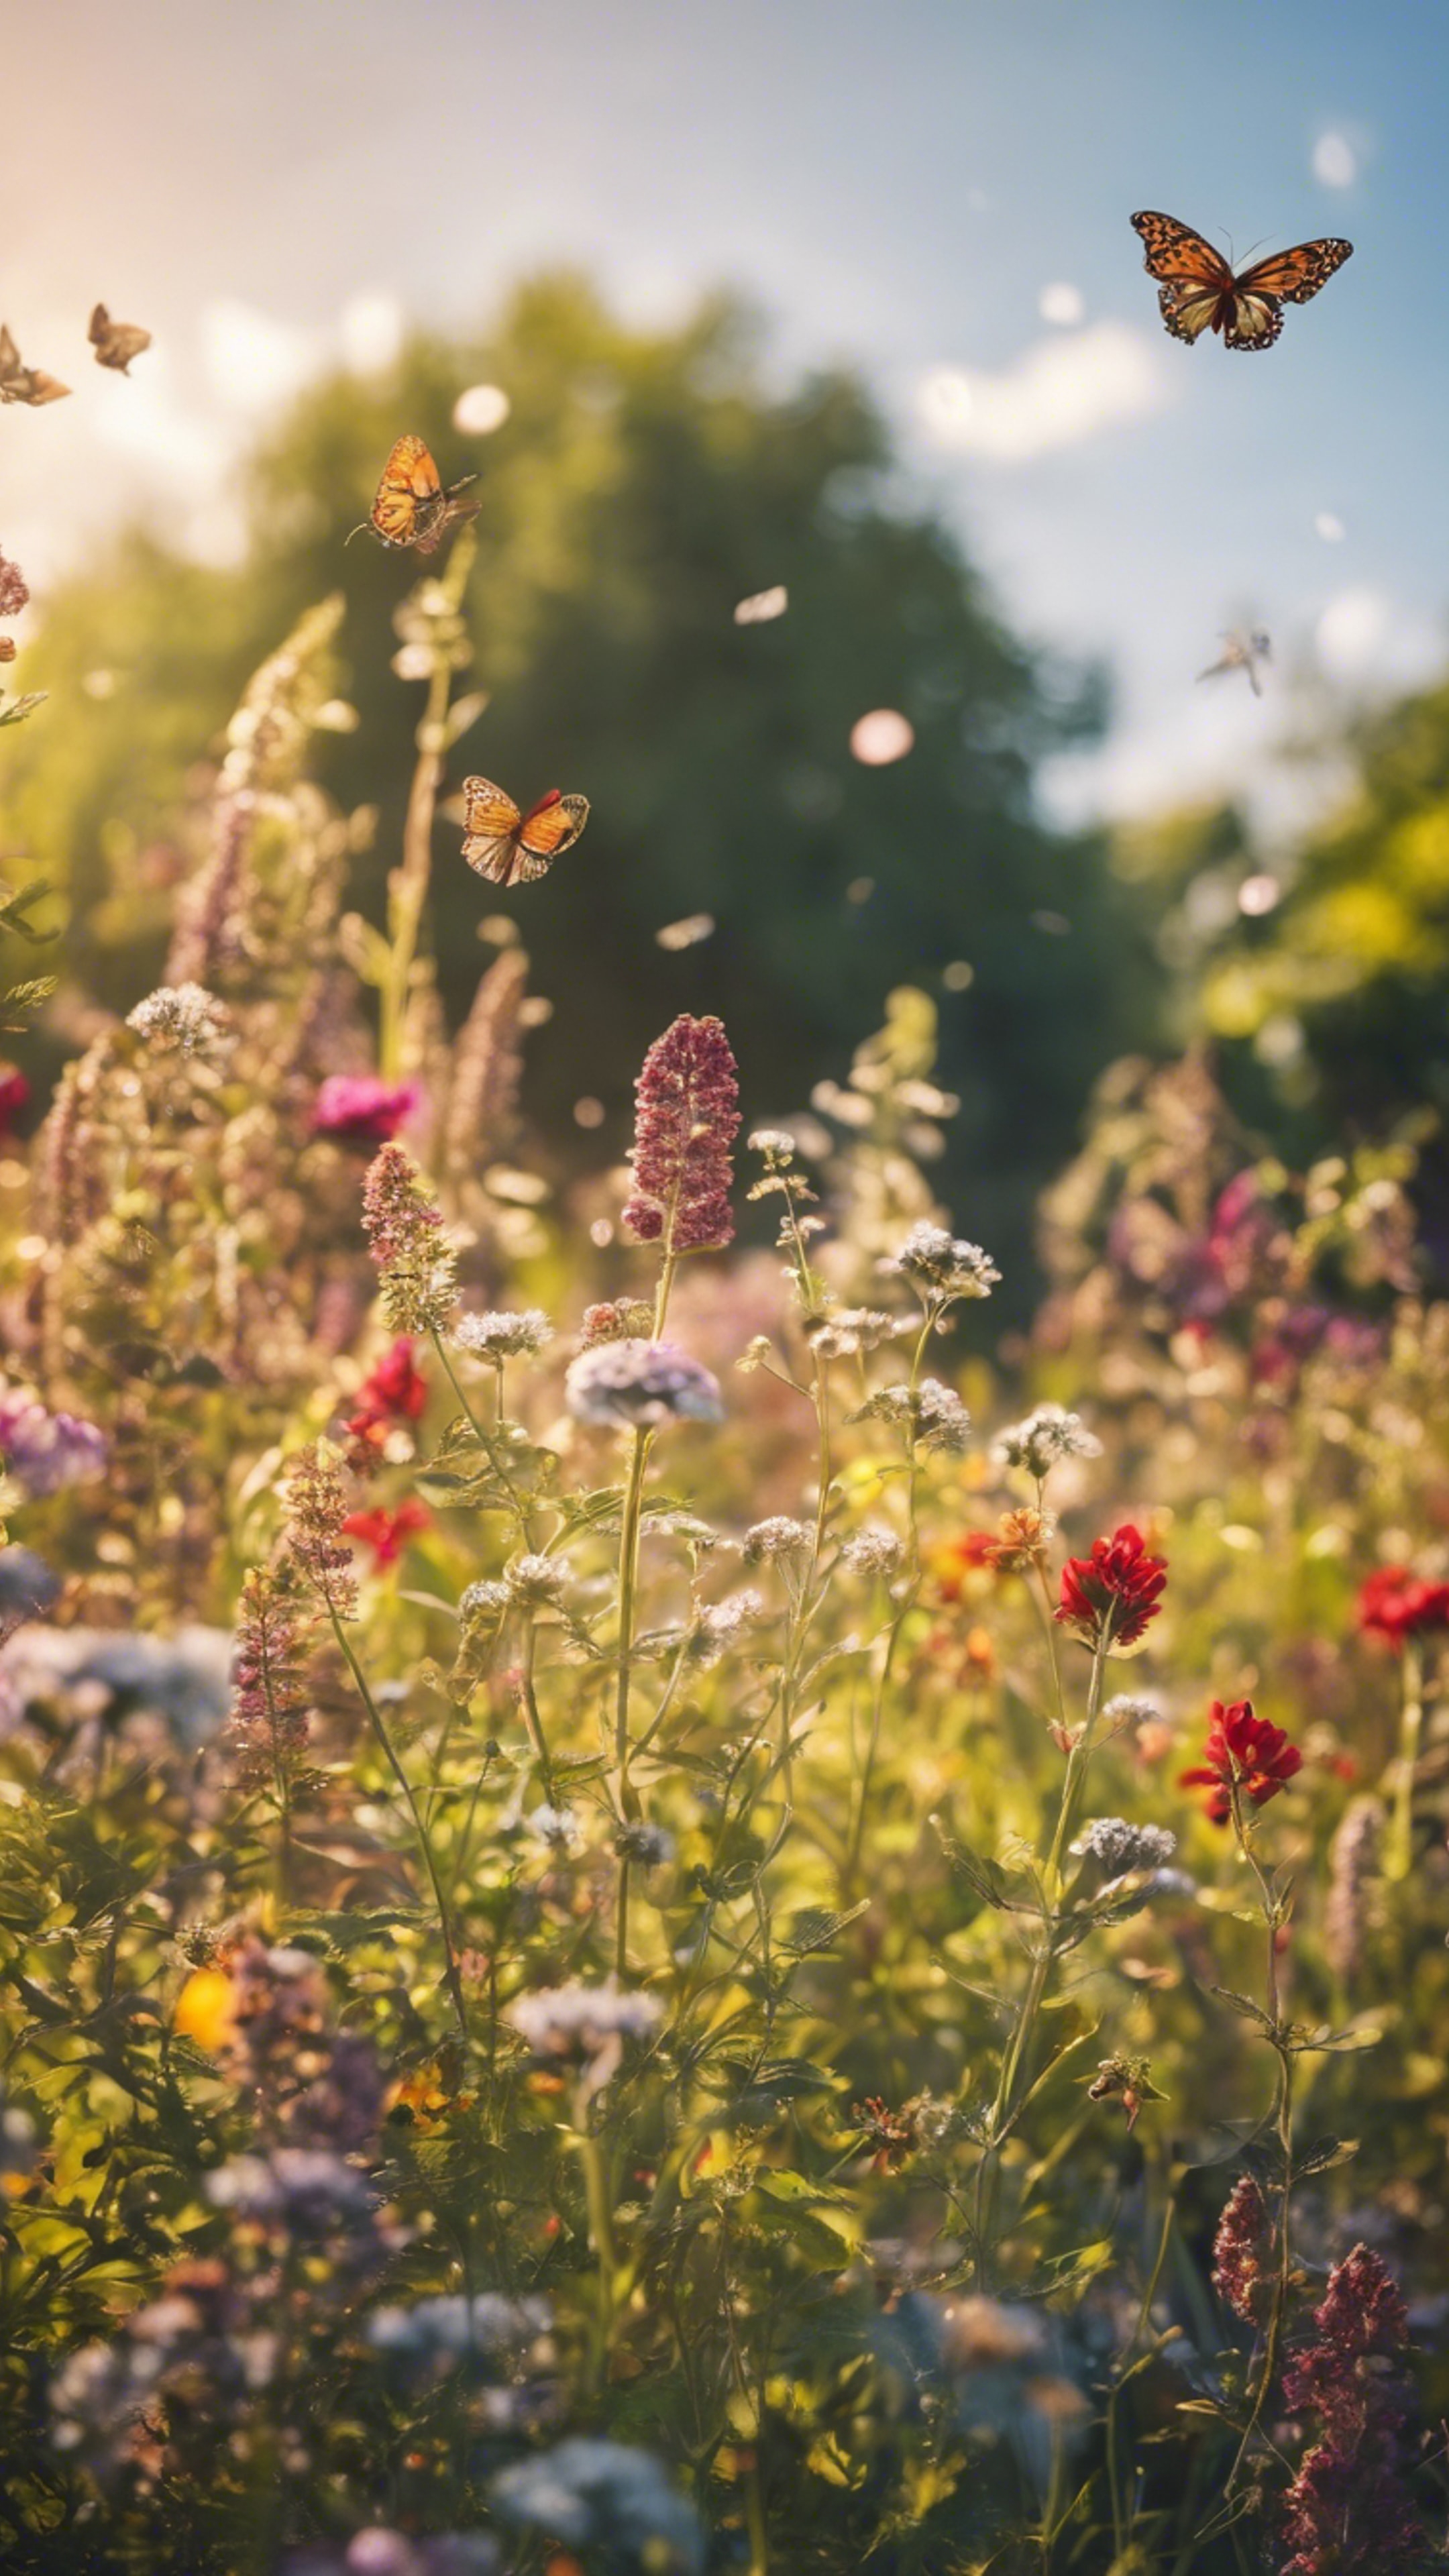 A colorful scene of a French country garden bursting with wildflowers and butterflies under a warm afternoon sun. Tapeta[d1166188c03b4b319ebf]